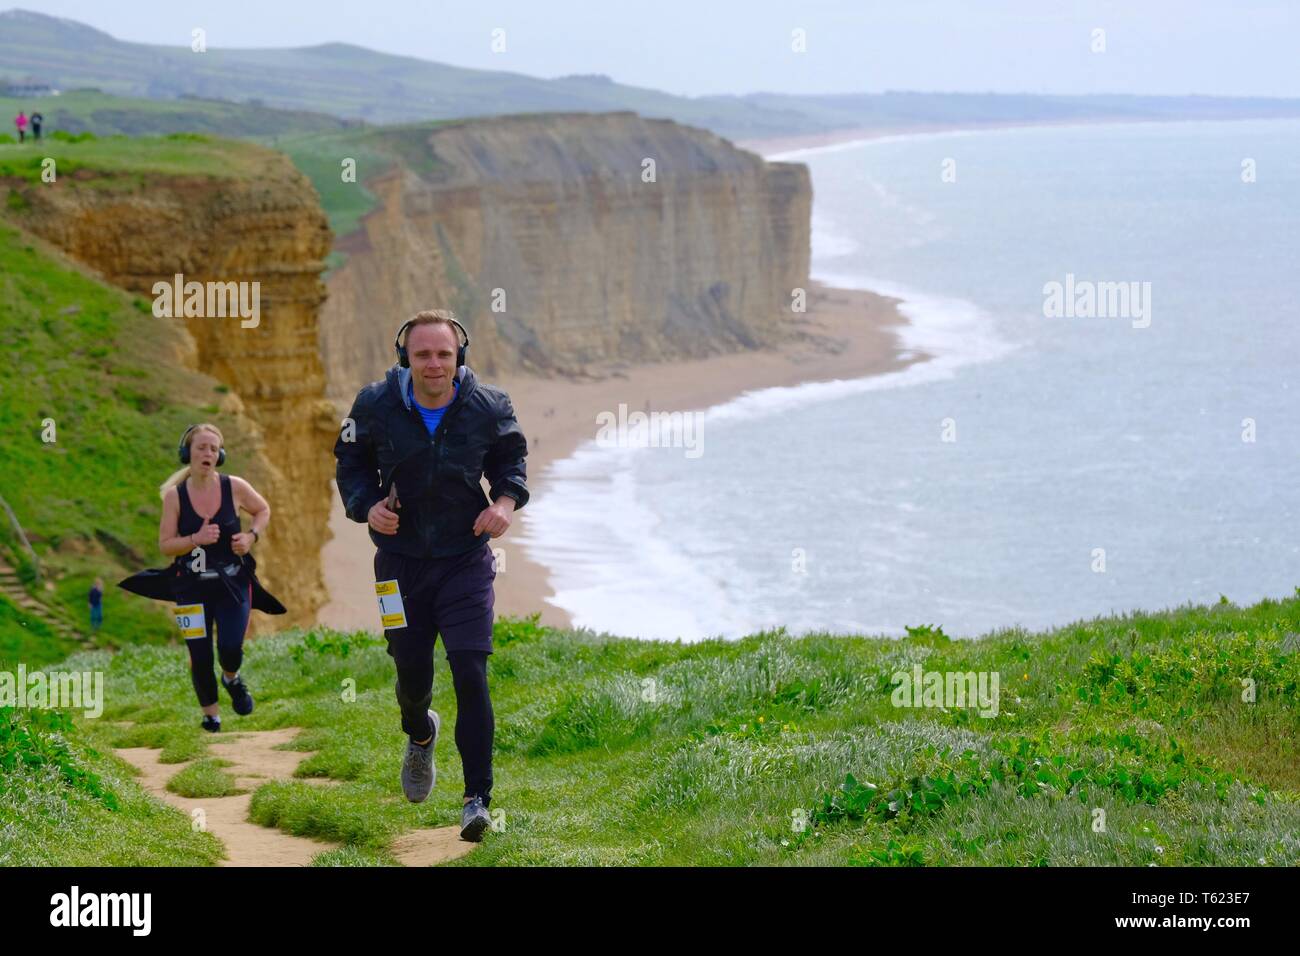 West Bay, Dorset, UK. 28 April 2019. As Storm Hannah subsides runners face the challanging hills of Dorsets Jurassic Coastline as they take part in the  annual Jurrasic  Trail race Credit: Tom Corban/Alamy Live News Stock Photo